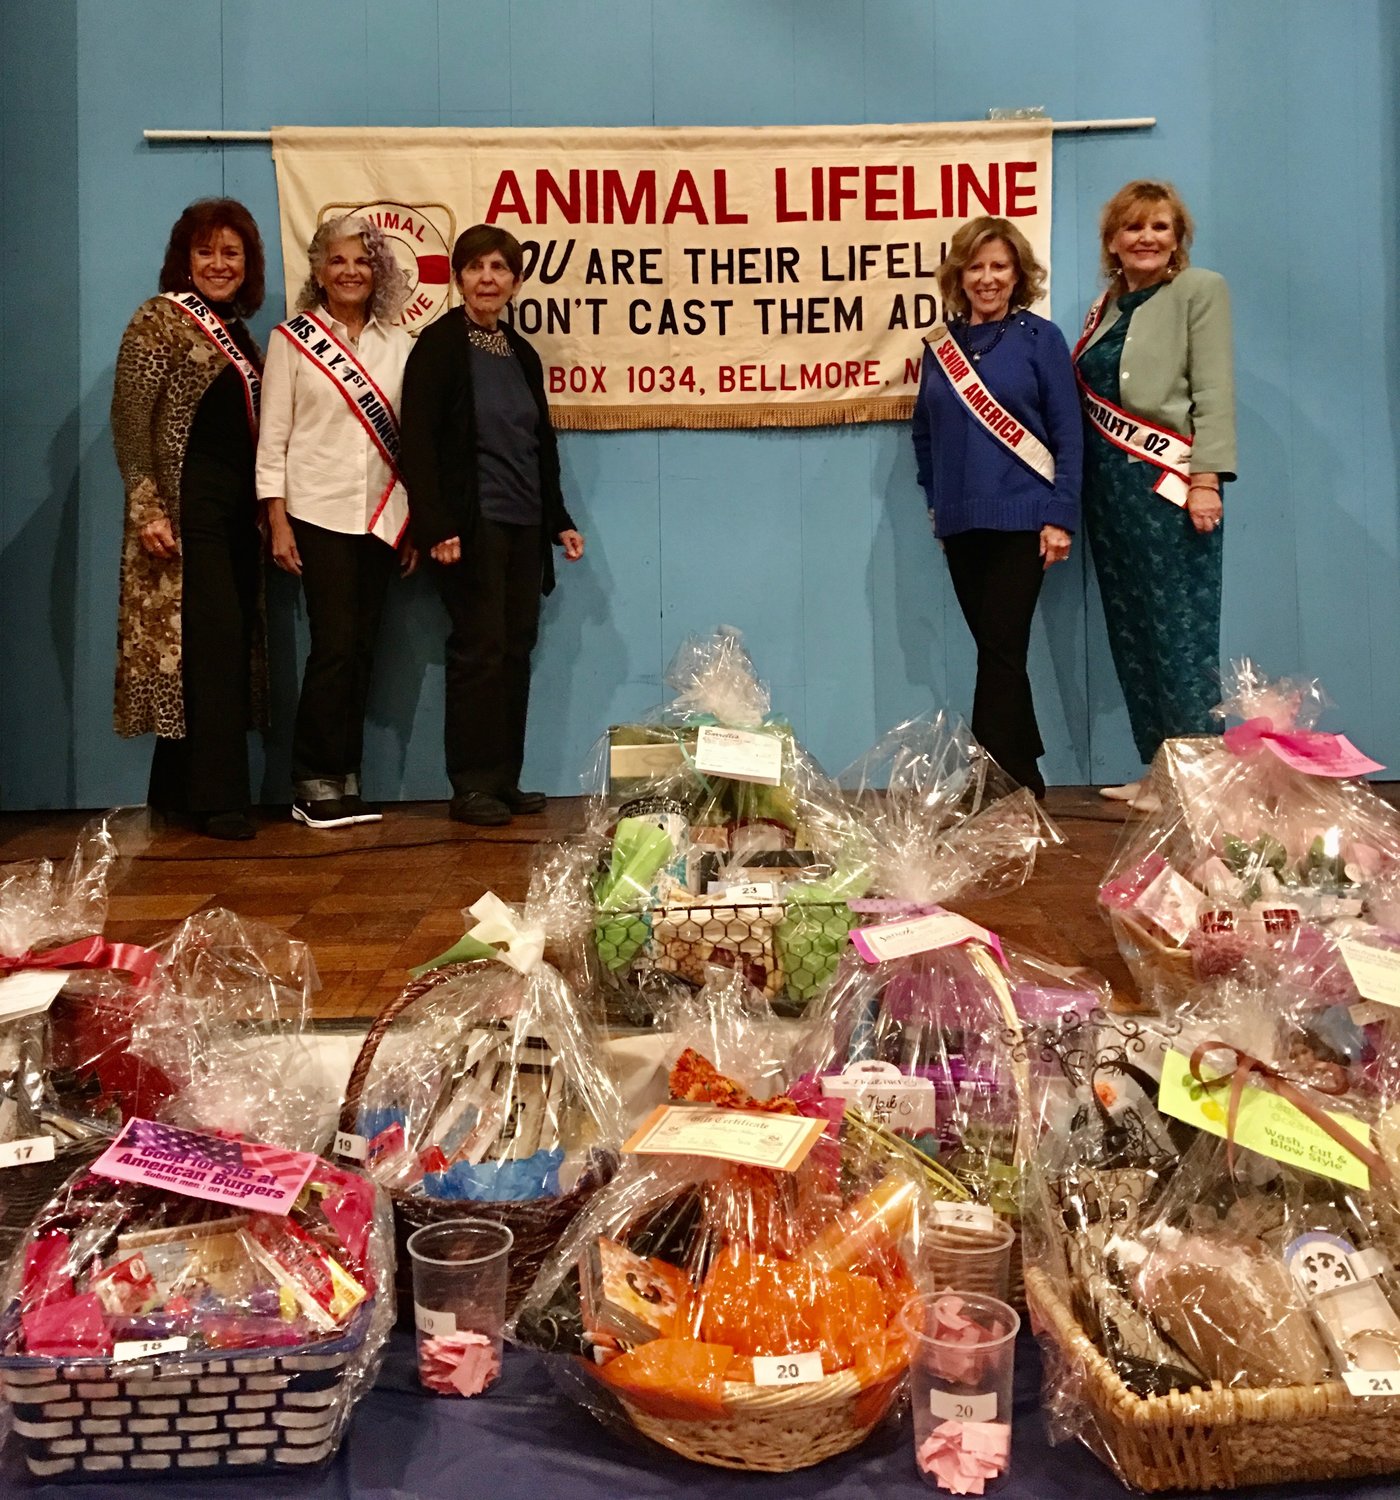 Dolores Hofman, far left, with Phyllis Bogart, Betty Tucker, Marleen Schuss and Pat Tropea, helped raise awareness of abandoned animals that need to be rescued and sheltered at the 2016 Ms. New York Senior America event. That was one of a number of ways in which Animal Lifeline, which Hofman runs, has publicized its efforts to rescue and foster strays.